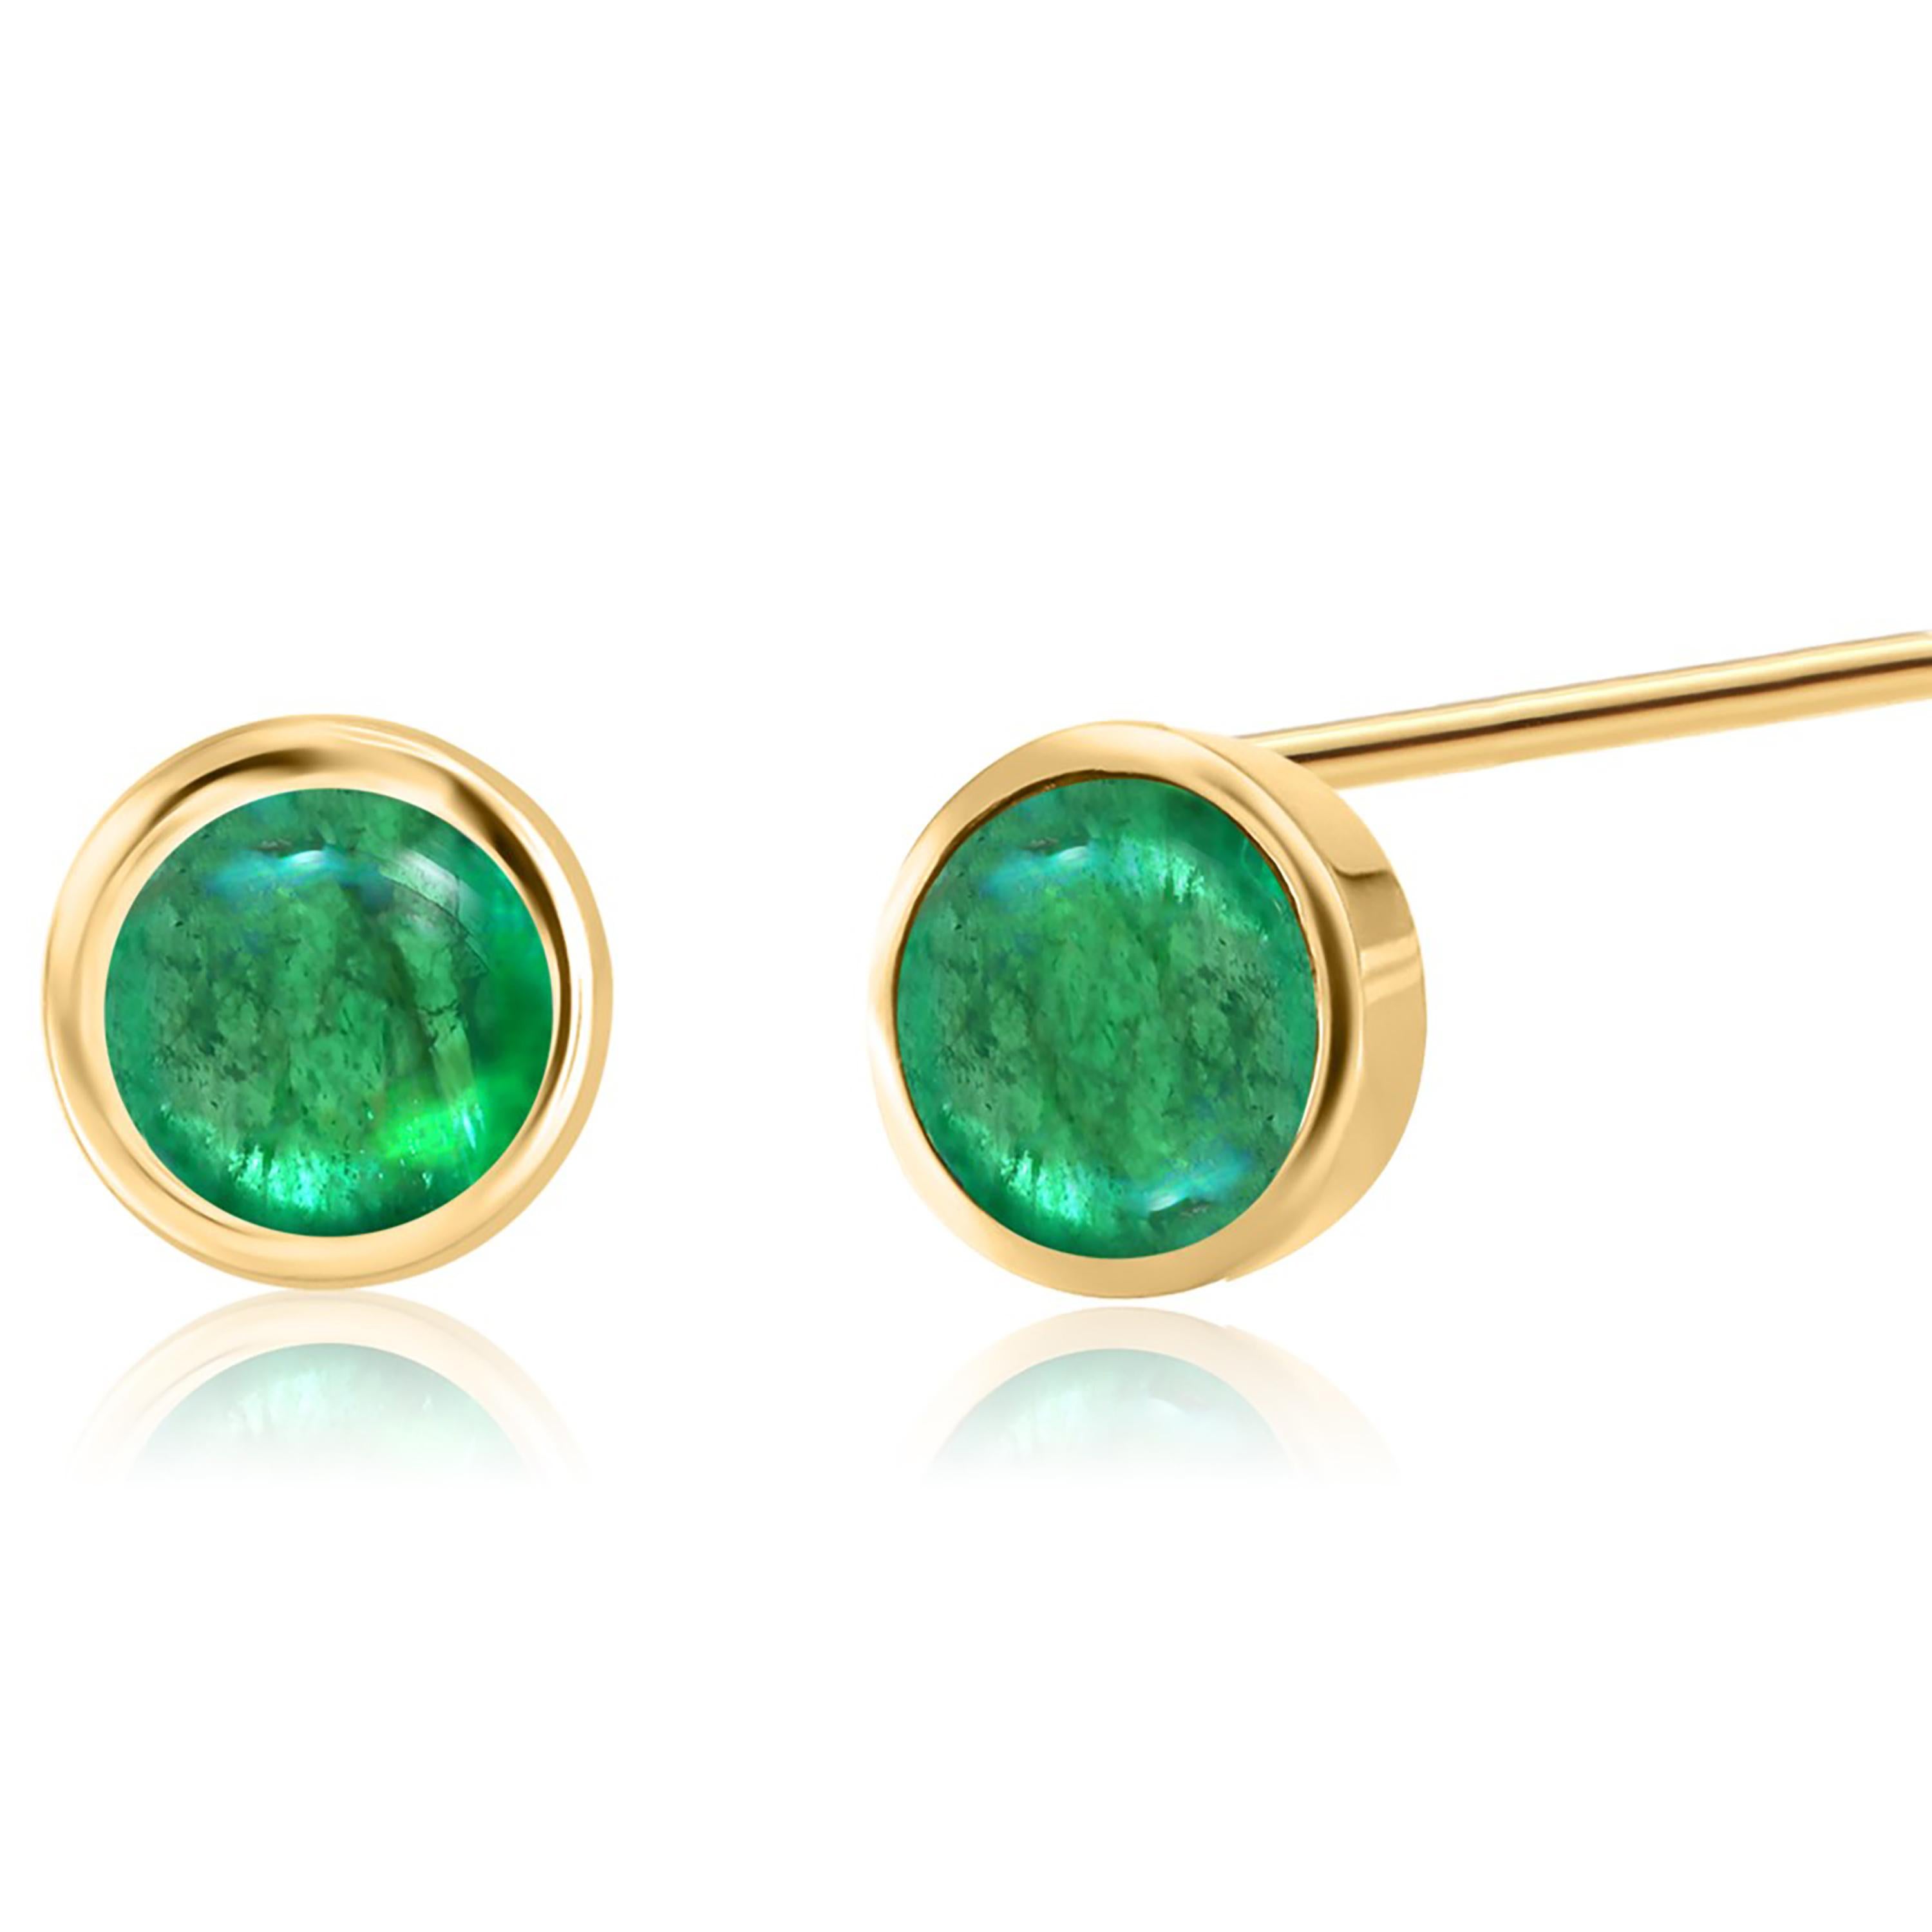 Matched Cabochon Emerald 1.10 Carat Bezel Set Yellow Gold 0.25 Inch Earrings For Sale 3